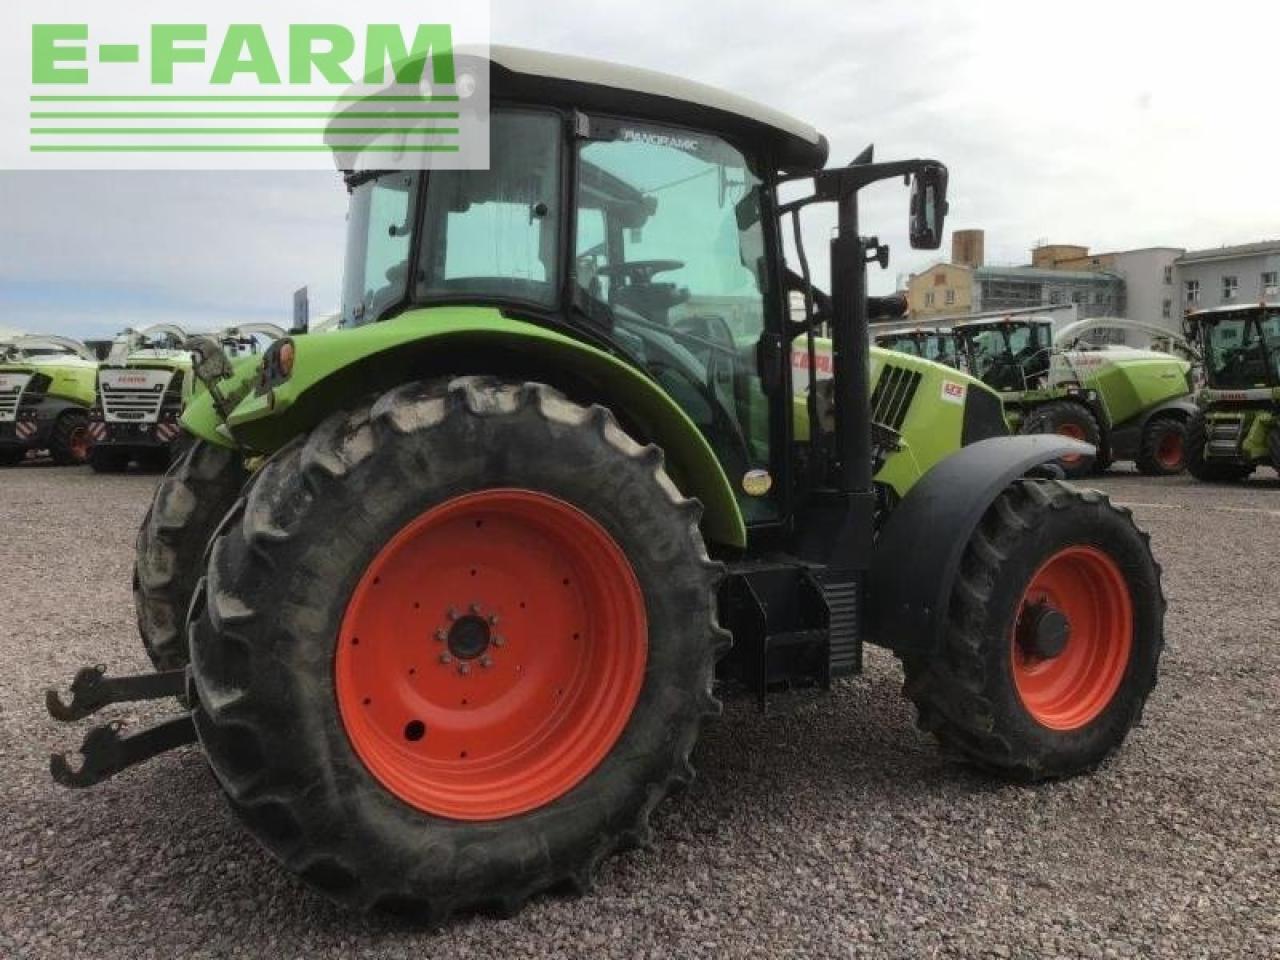 Tractor CLAAS arion 460